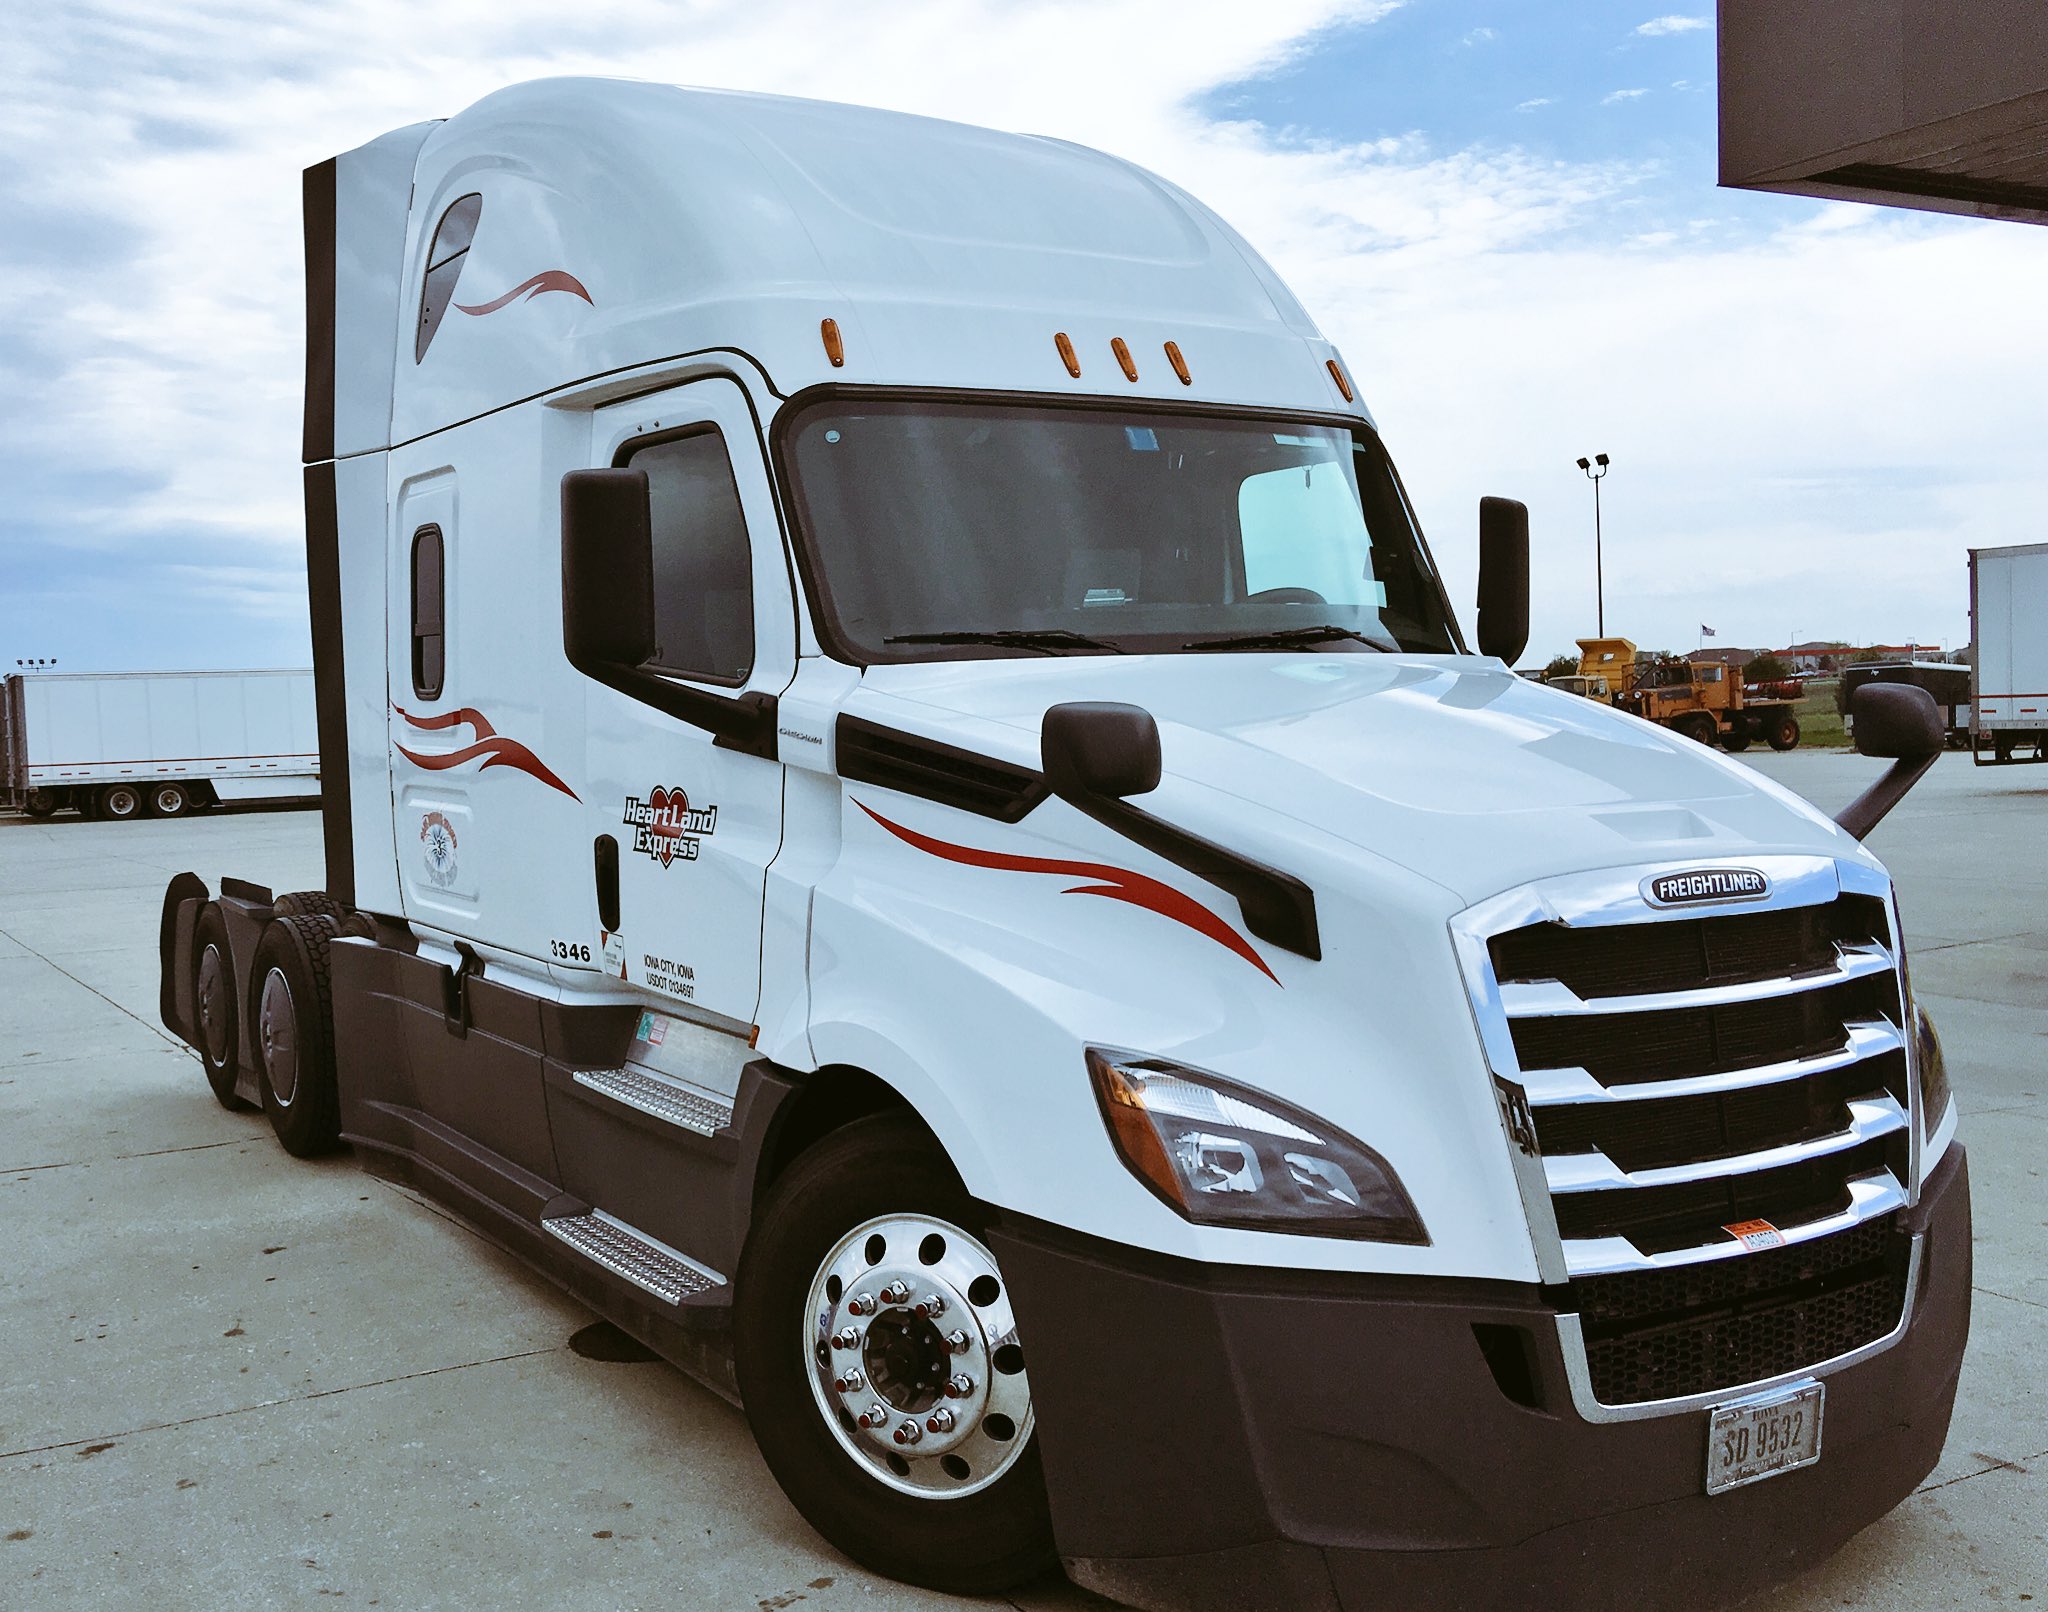 Heartland Express on Twitter: "The 2018 @Freightliner Cascadias are bad